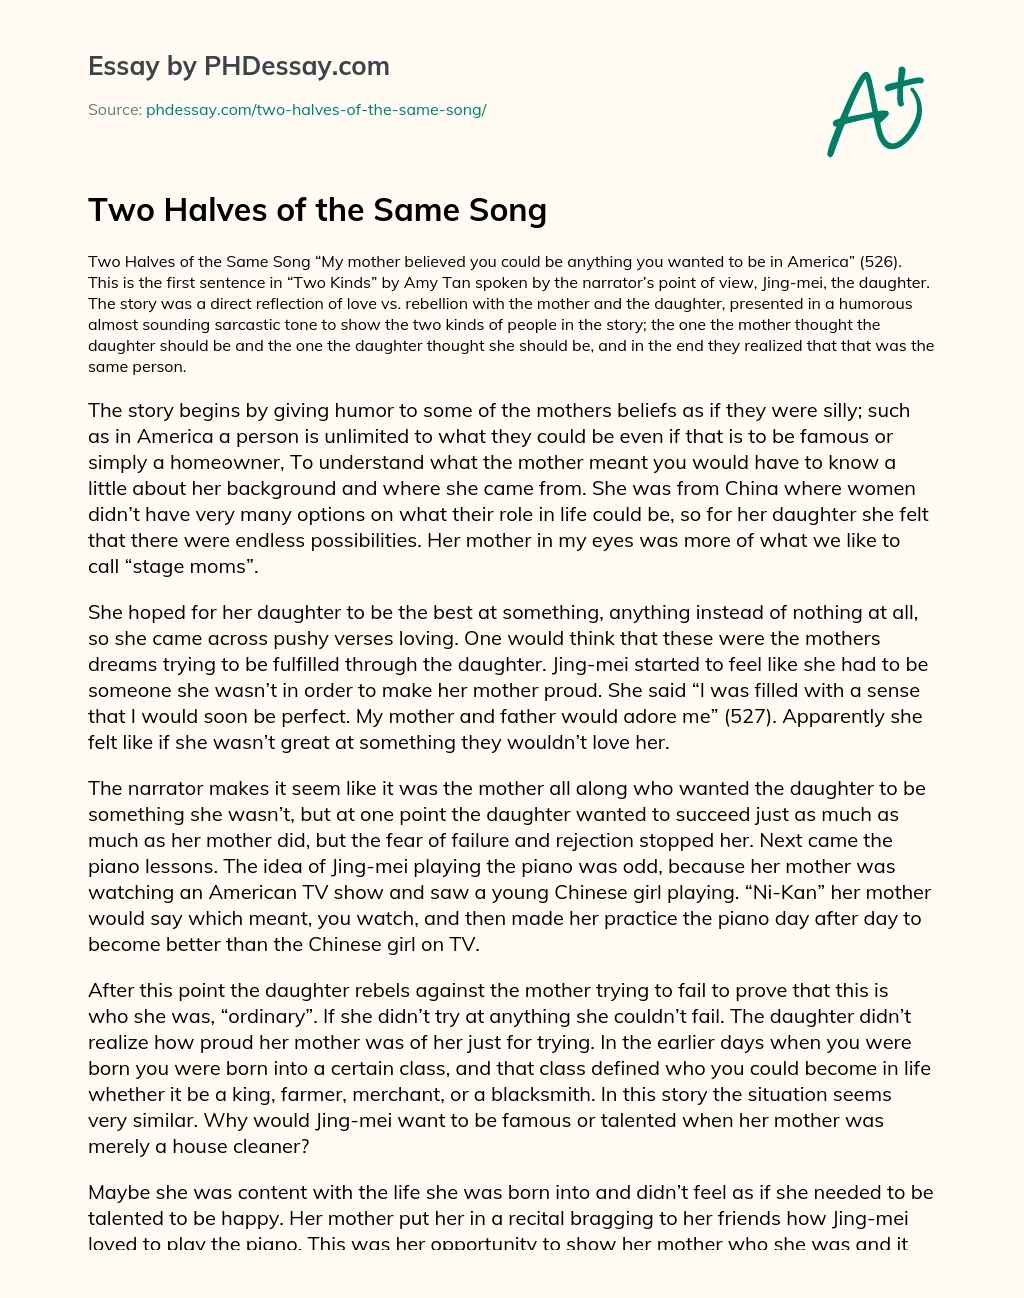 Two Halves of the Same Song essay